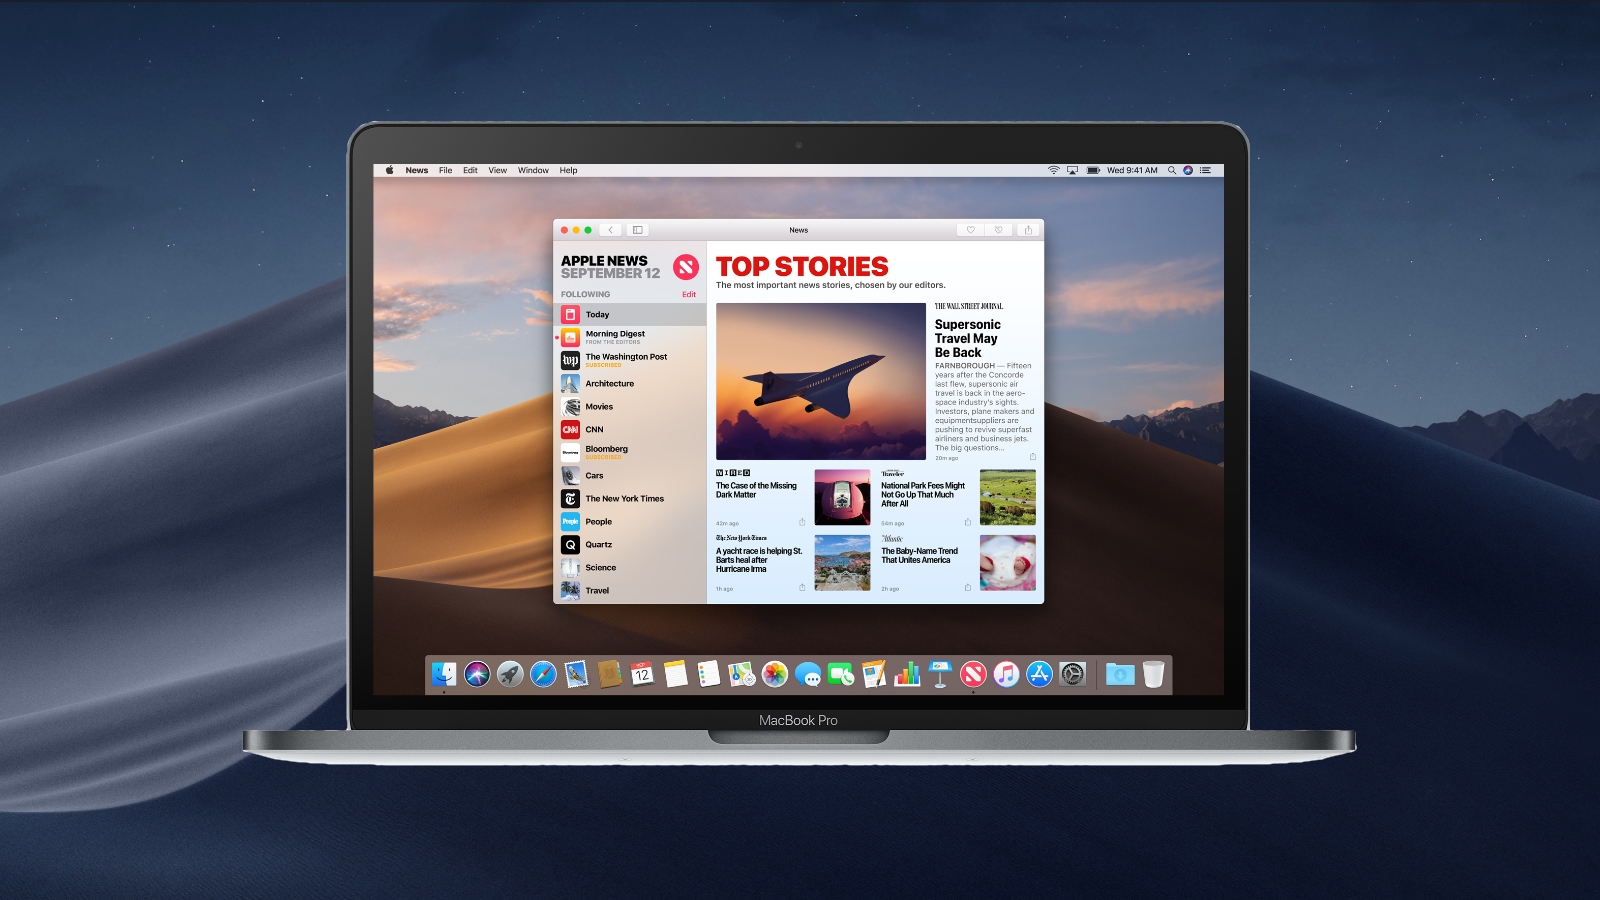 MacOS Mojave: What’s New And Different